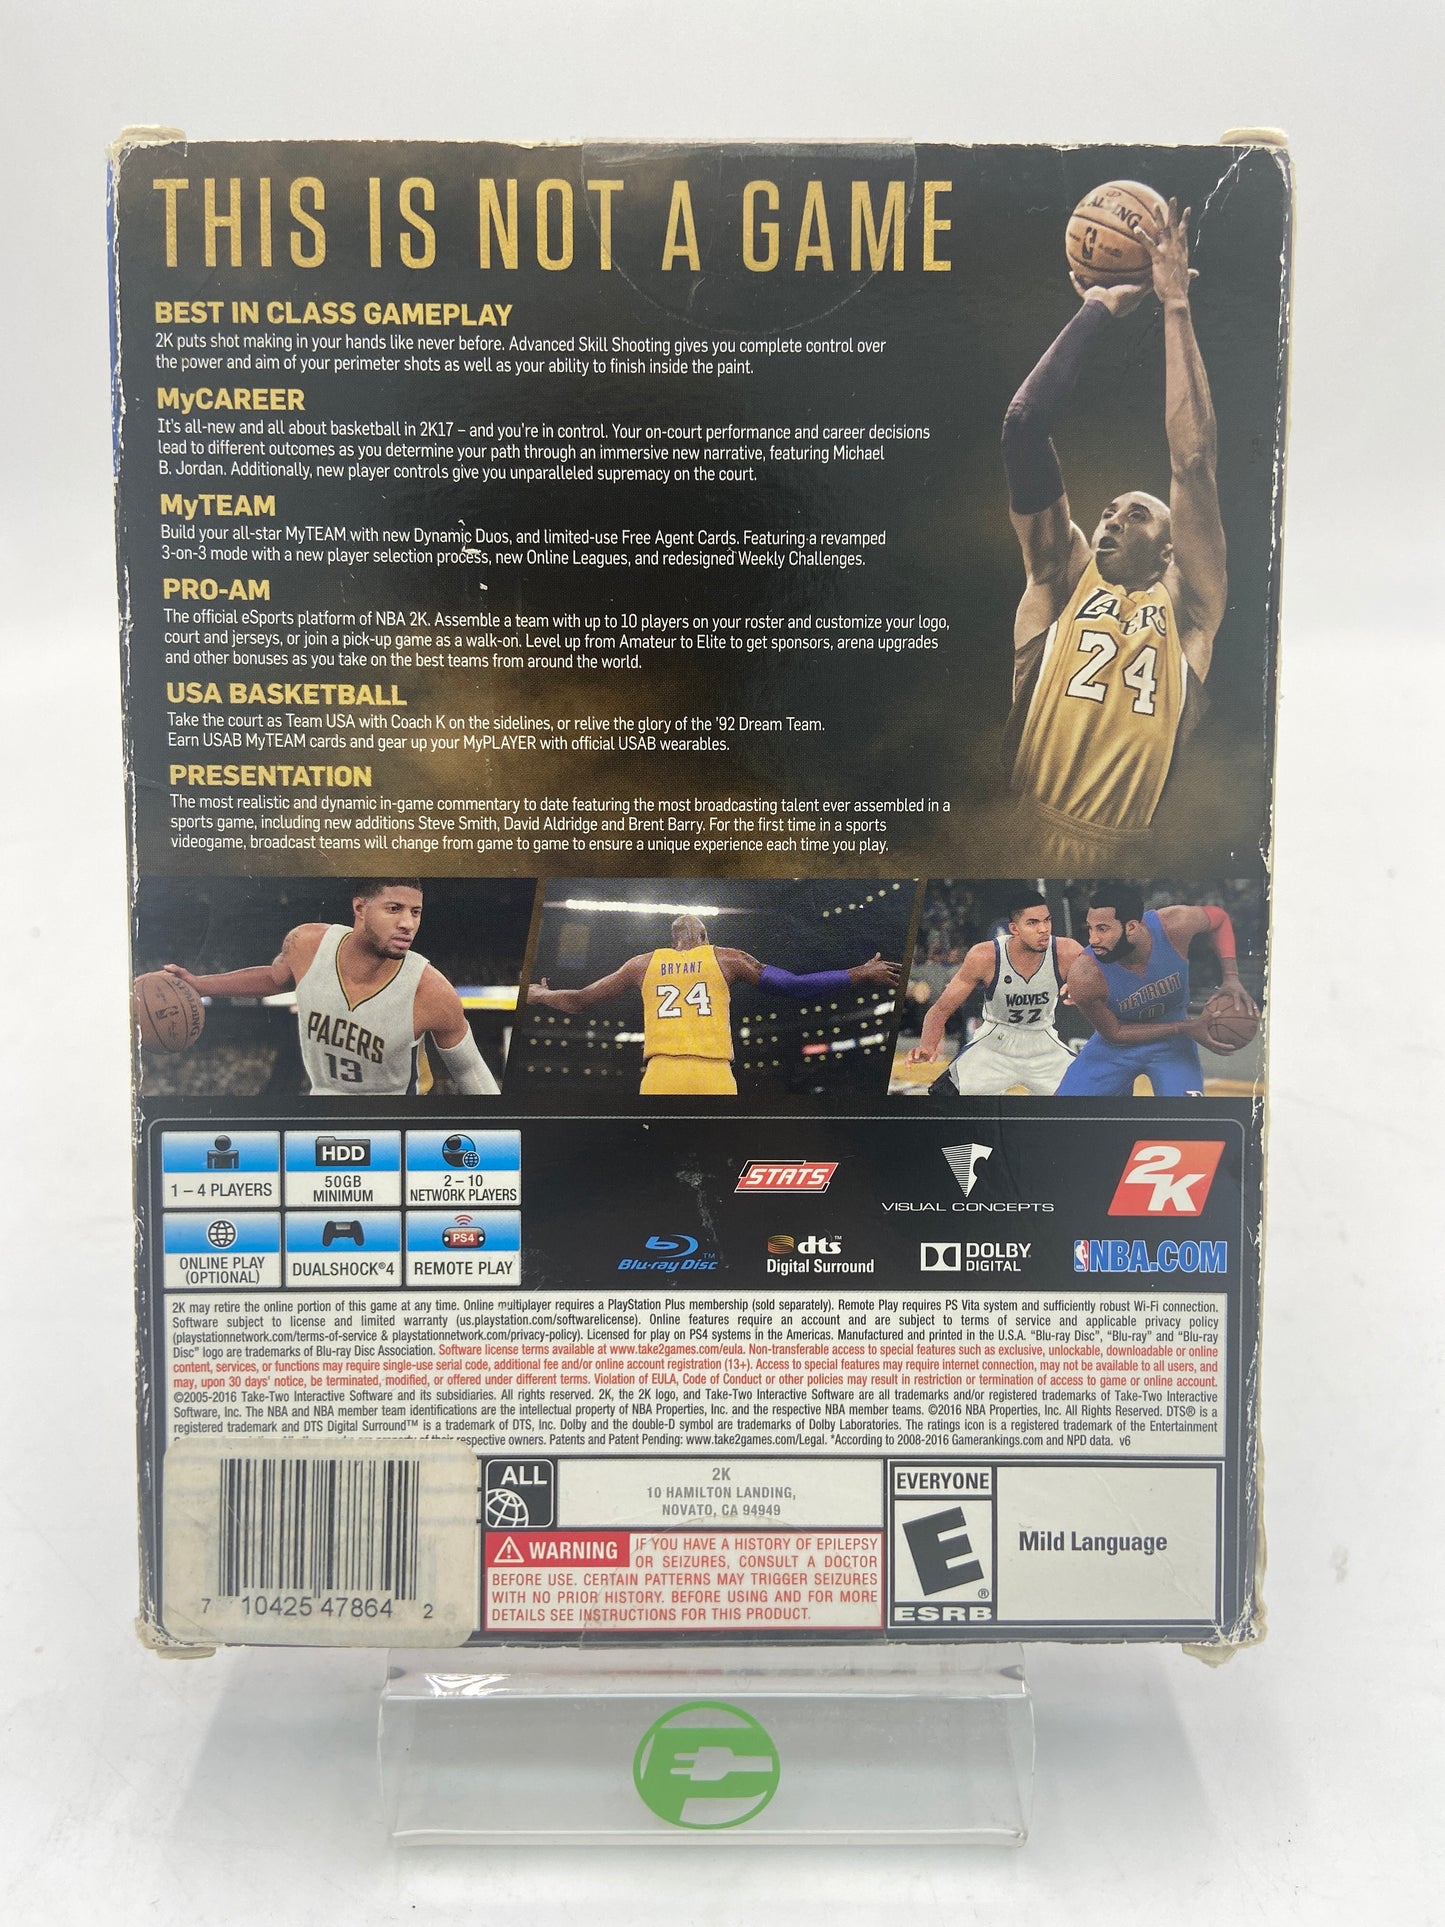 NBA 2K17 [Legend Edition Gold] (Sony PlayStation 4 PS4, 2016)